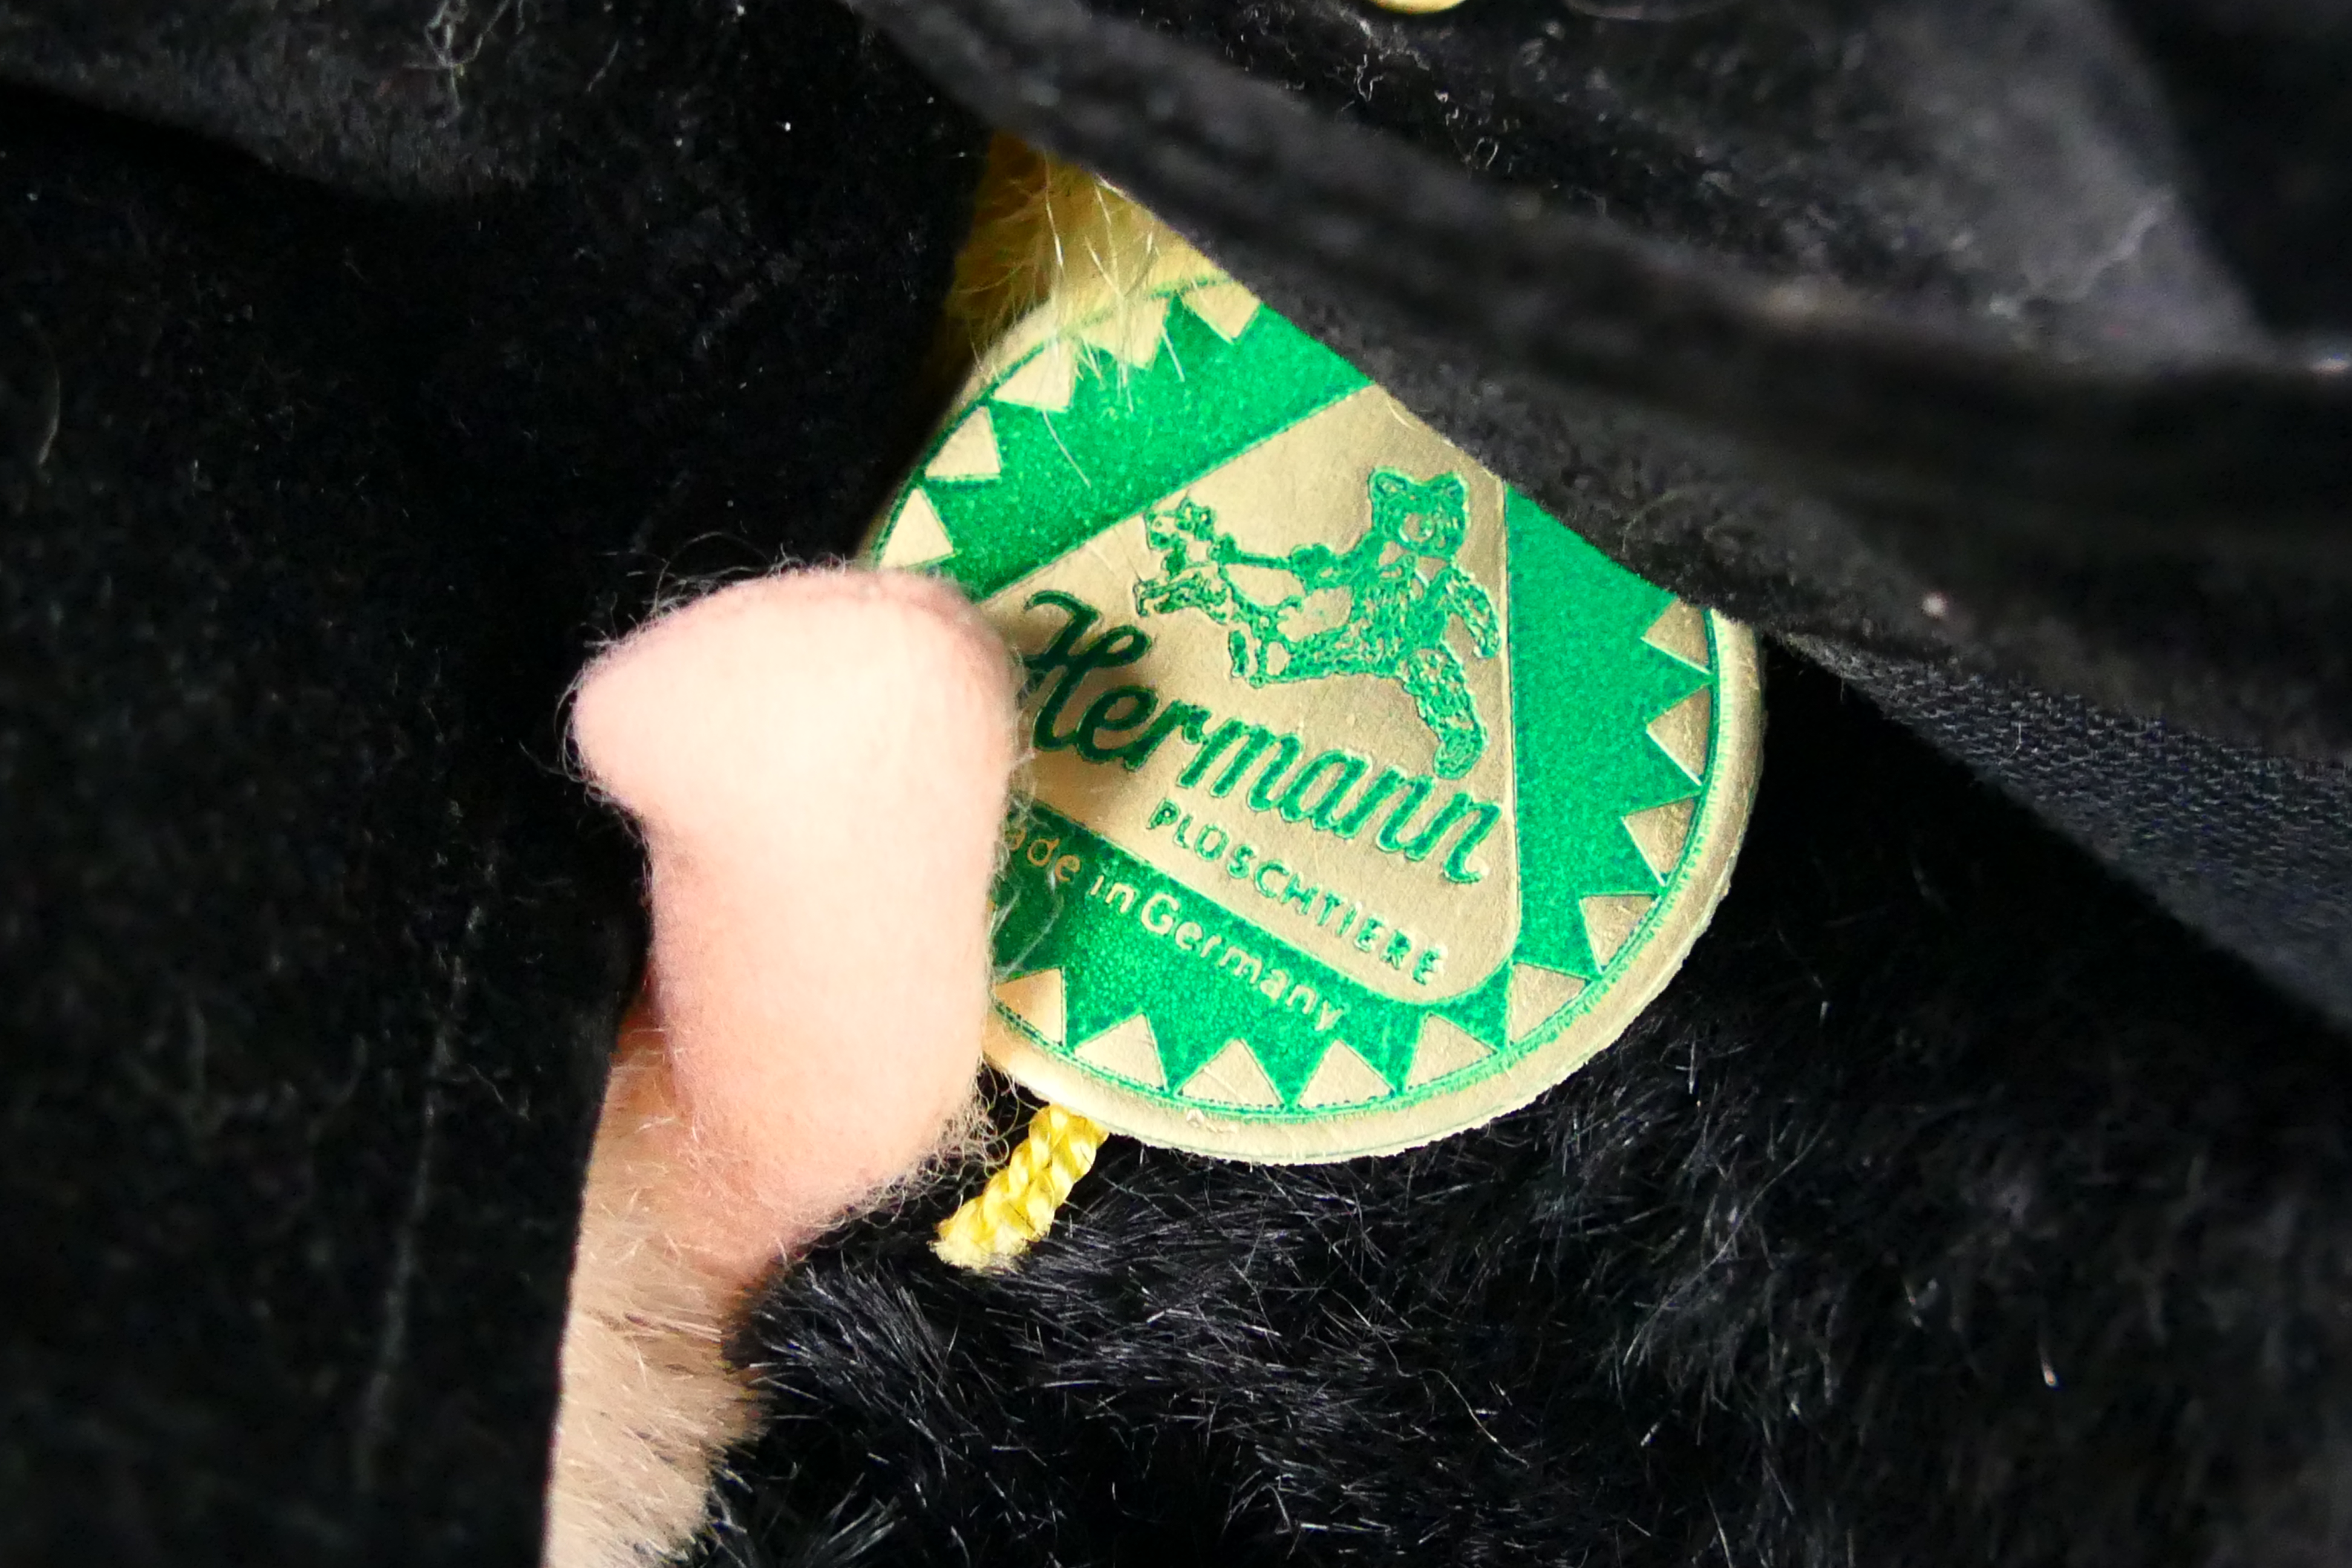 Hermann Bears - A limited edition mohair Chimney Sweep Good Luck bear number 354 of only 1000 - Image 7 of 7